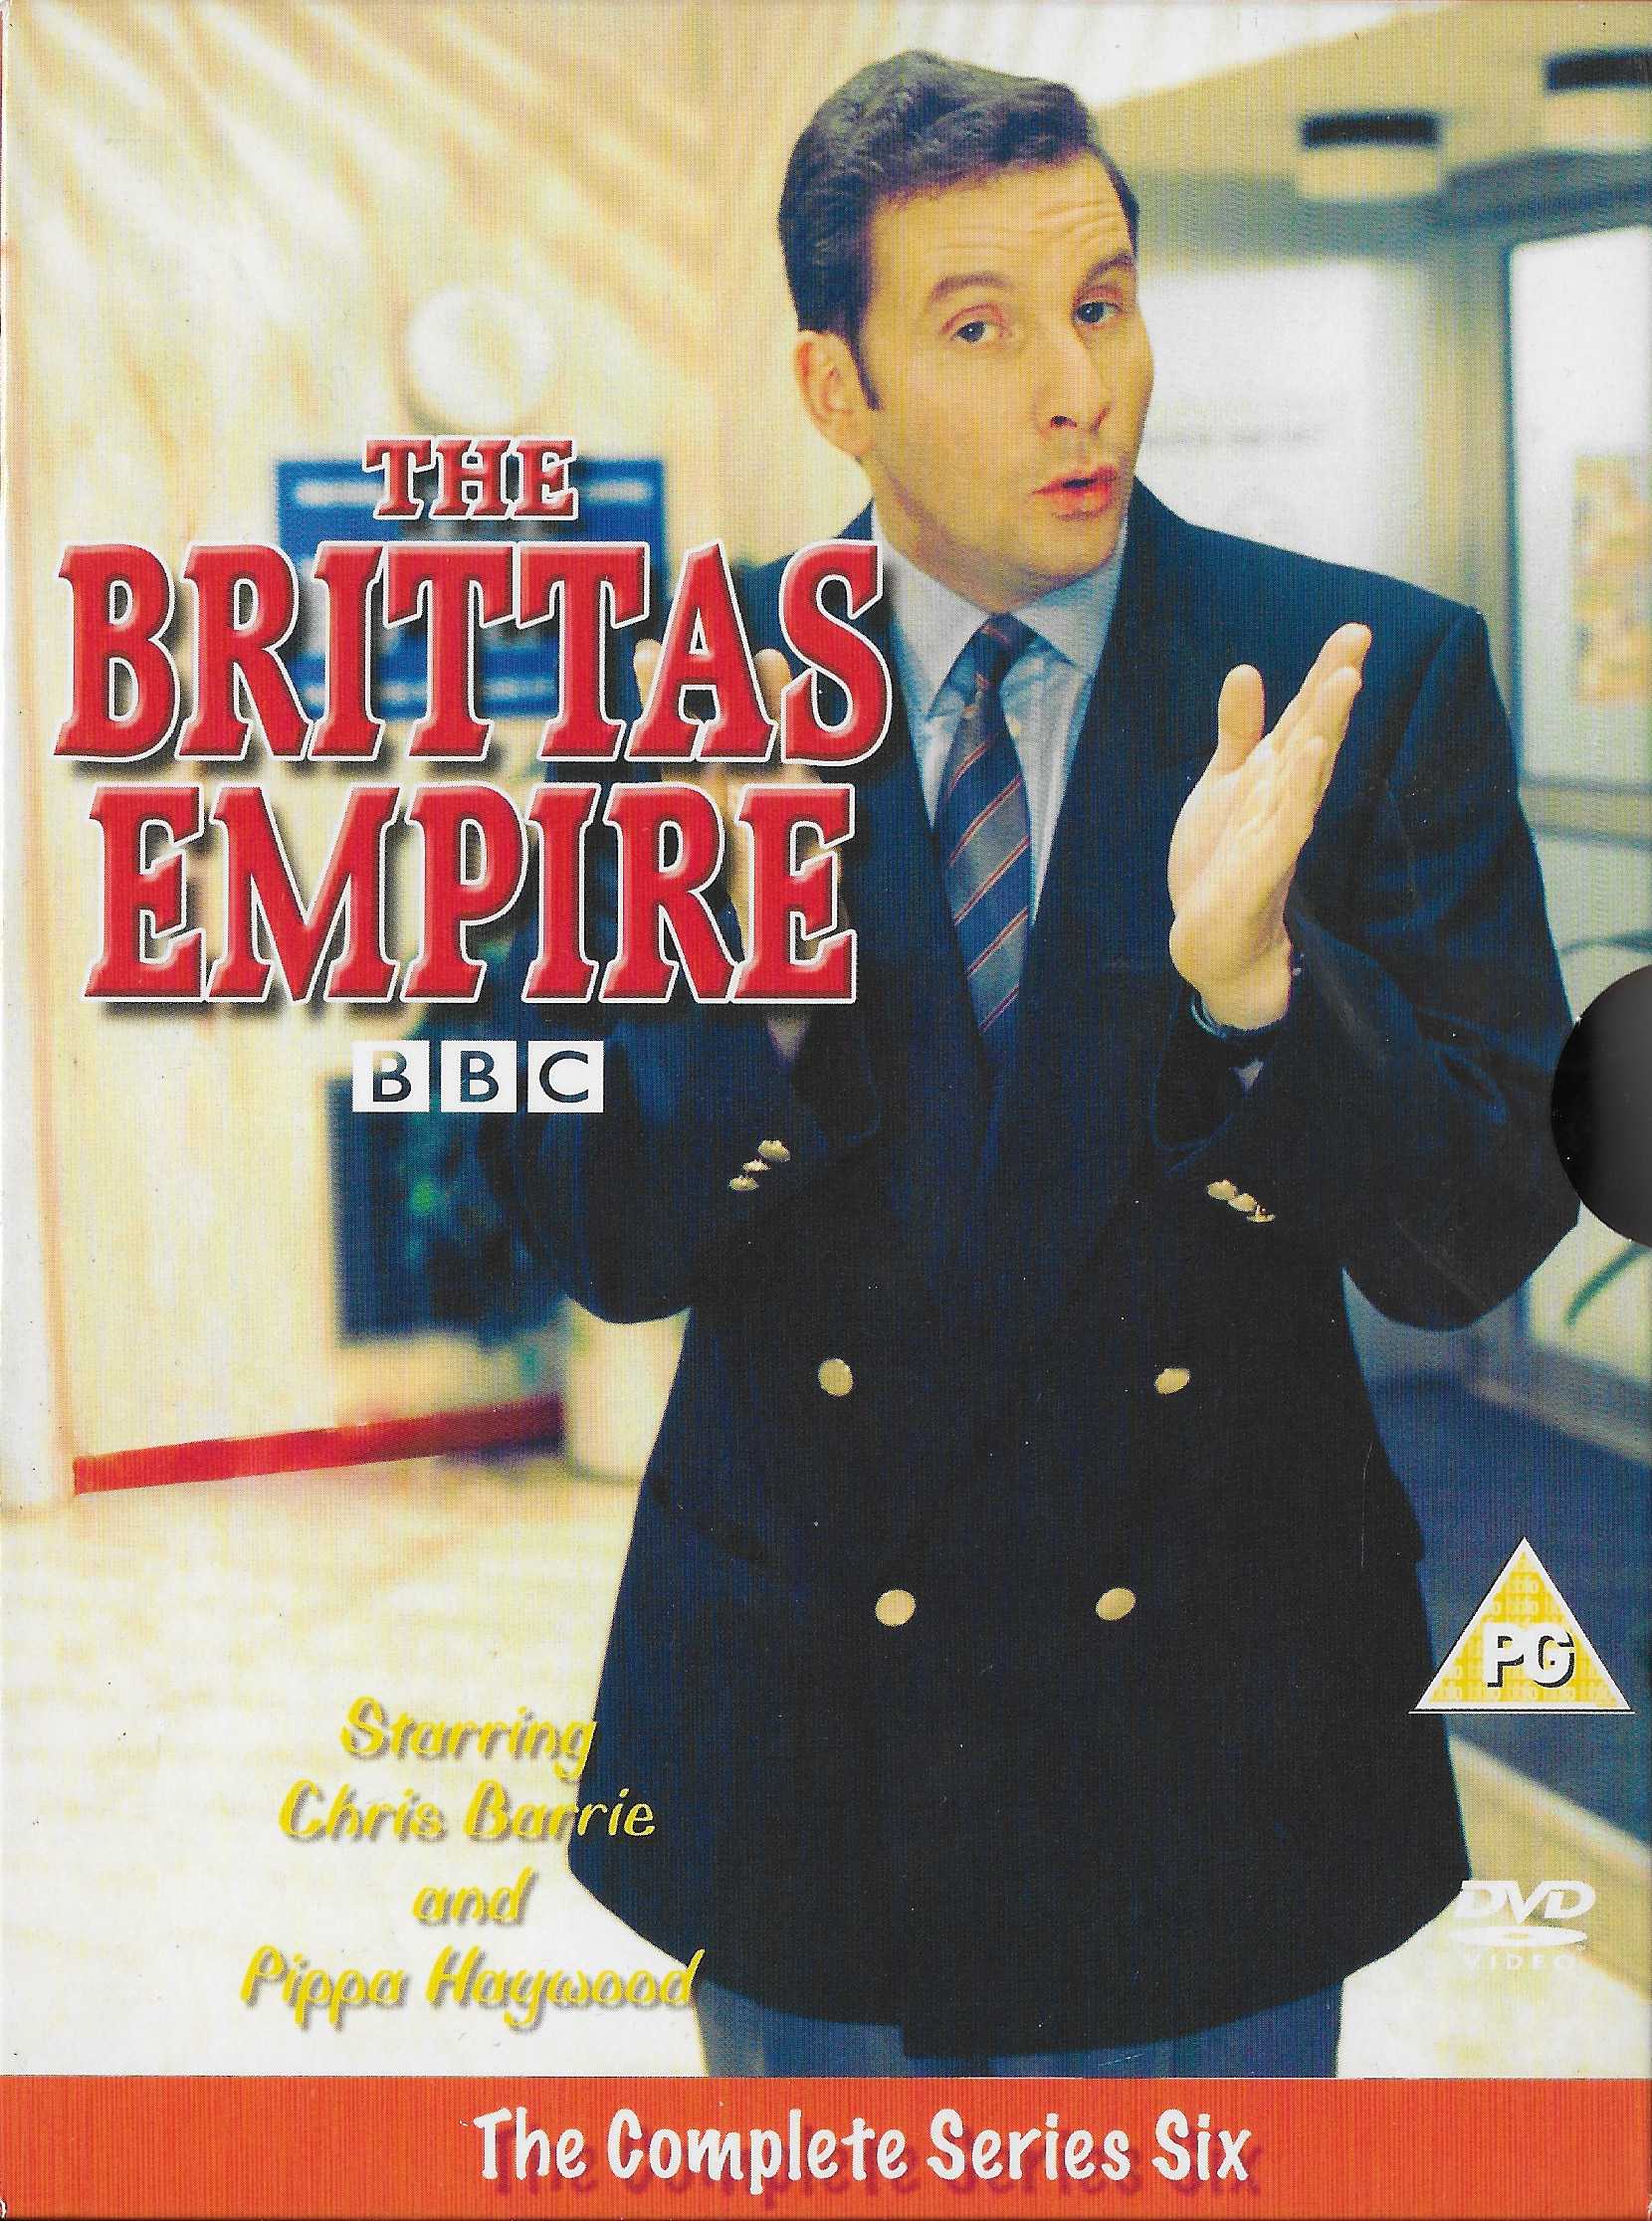 Picture of The Brittas empire - Series 6 by artist Ian Davidson / Peter Vincent / Tony Millan / Mike Walling / Terry Kyan / Paul Smith from the BBC dvds - Records and Tapes library